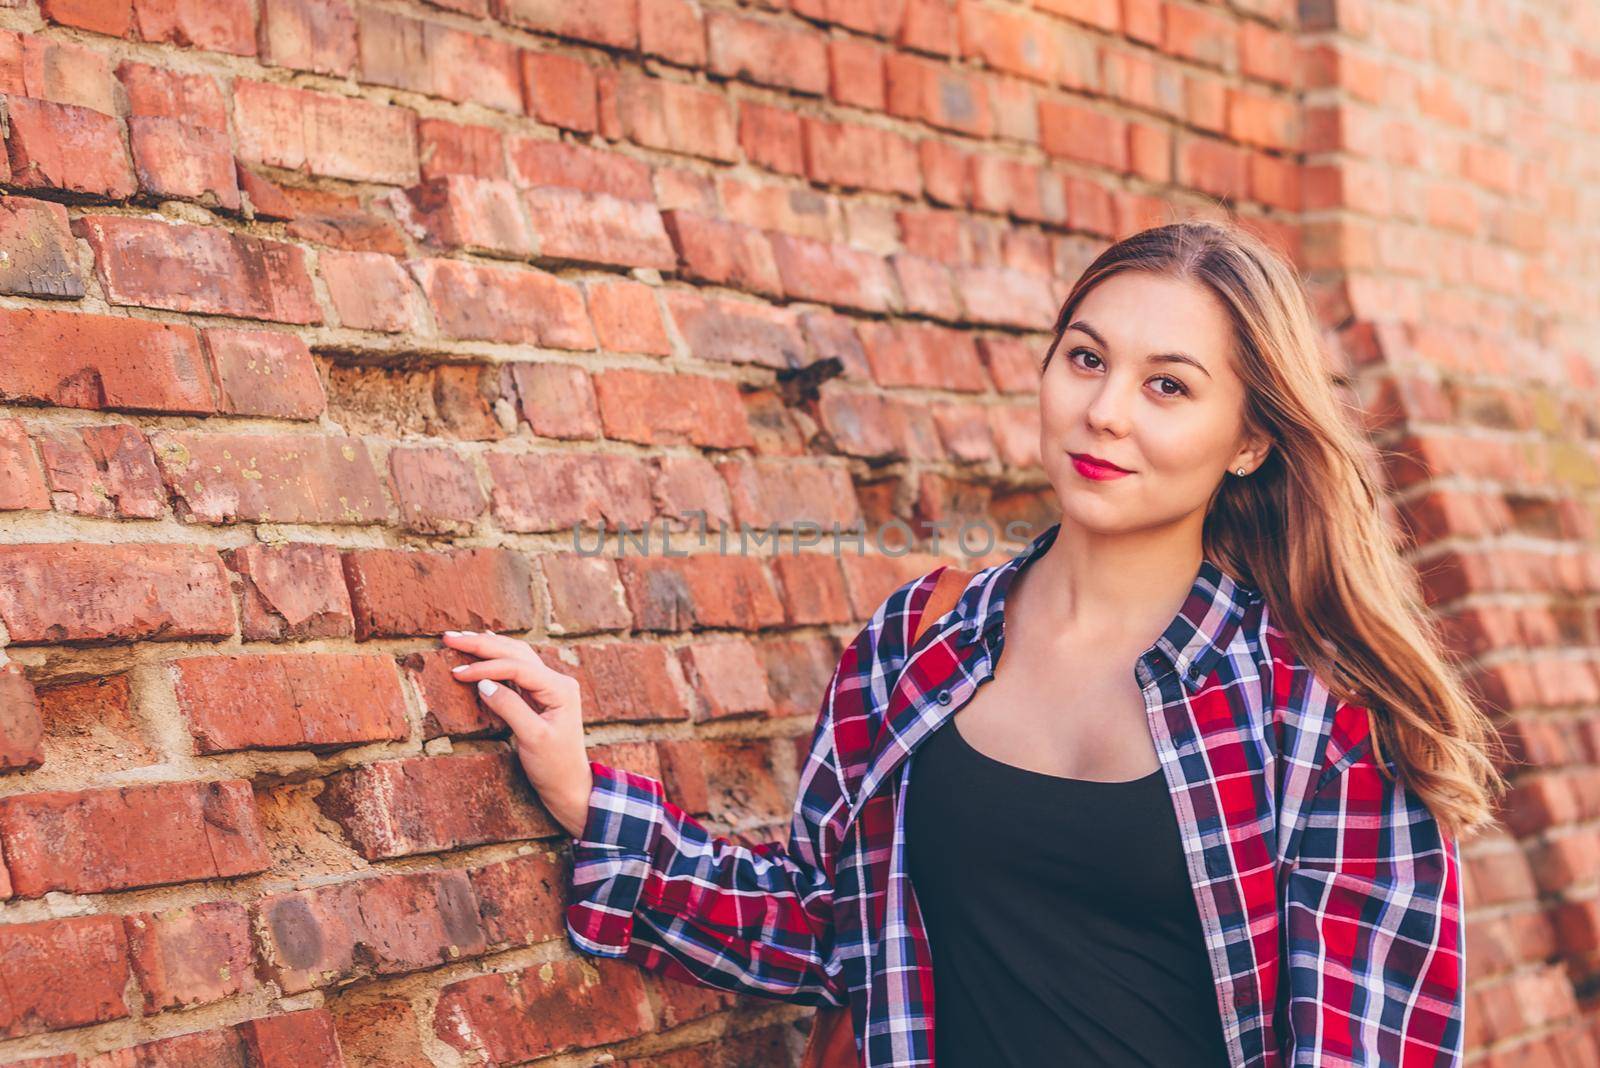 Portrait of young woman in checkered shirt and blue jeans standing against brick wall